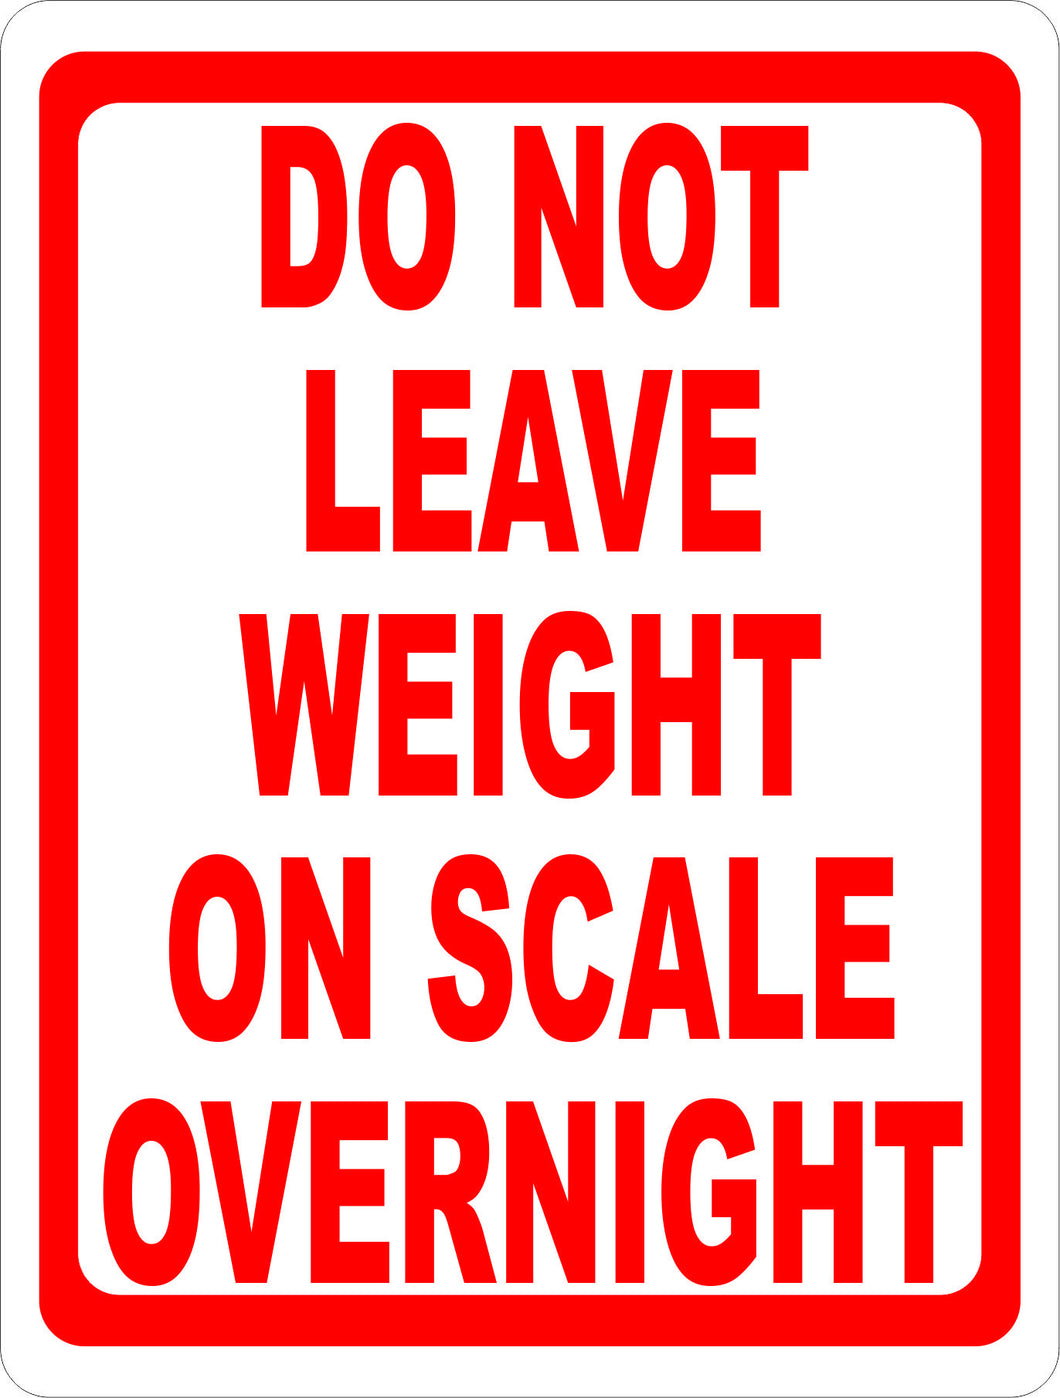 Do Not Leave Weight on Scale Overnight Sign - Signs & Decals by SalaGraphics